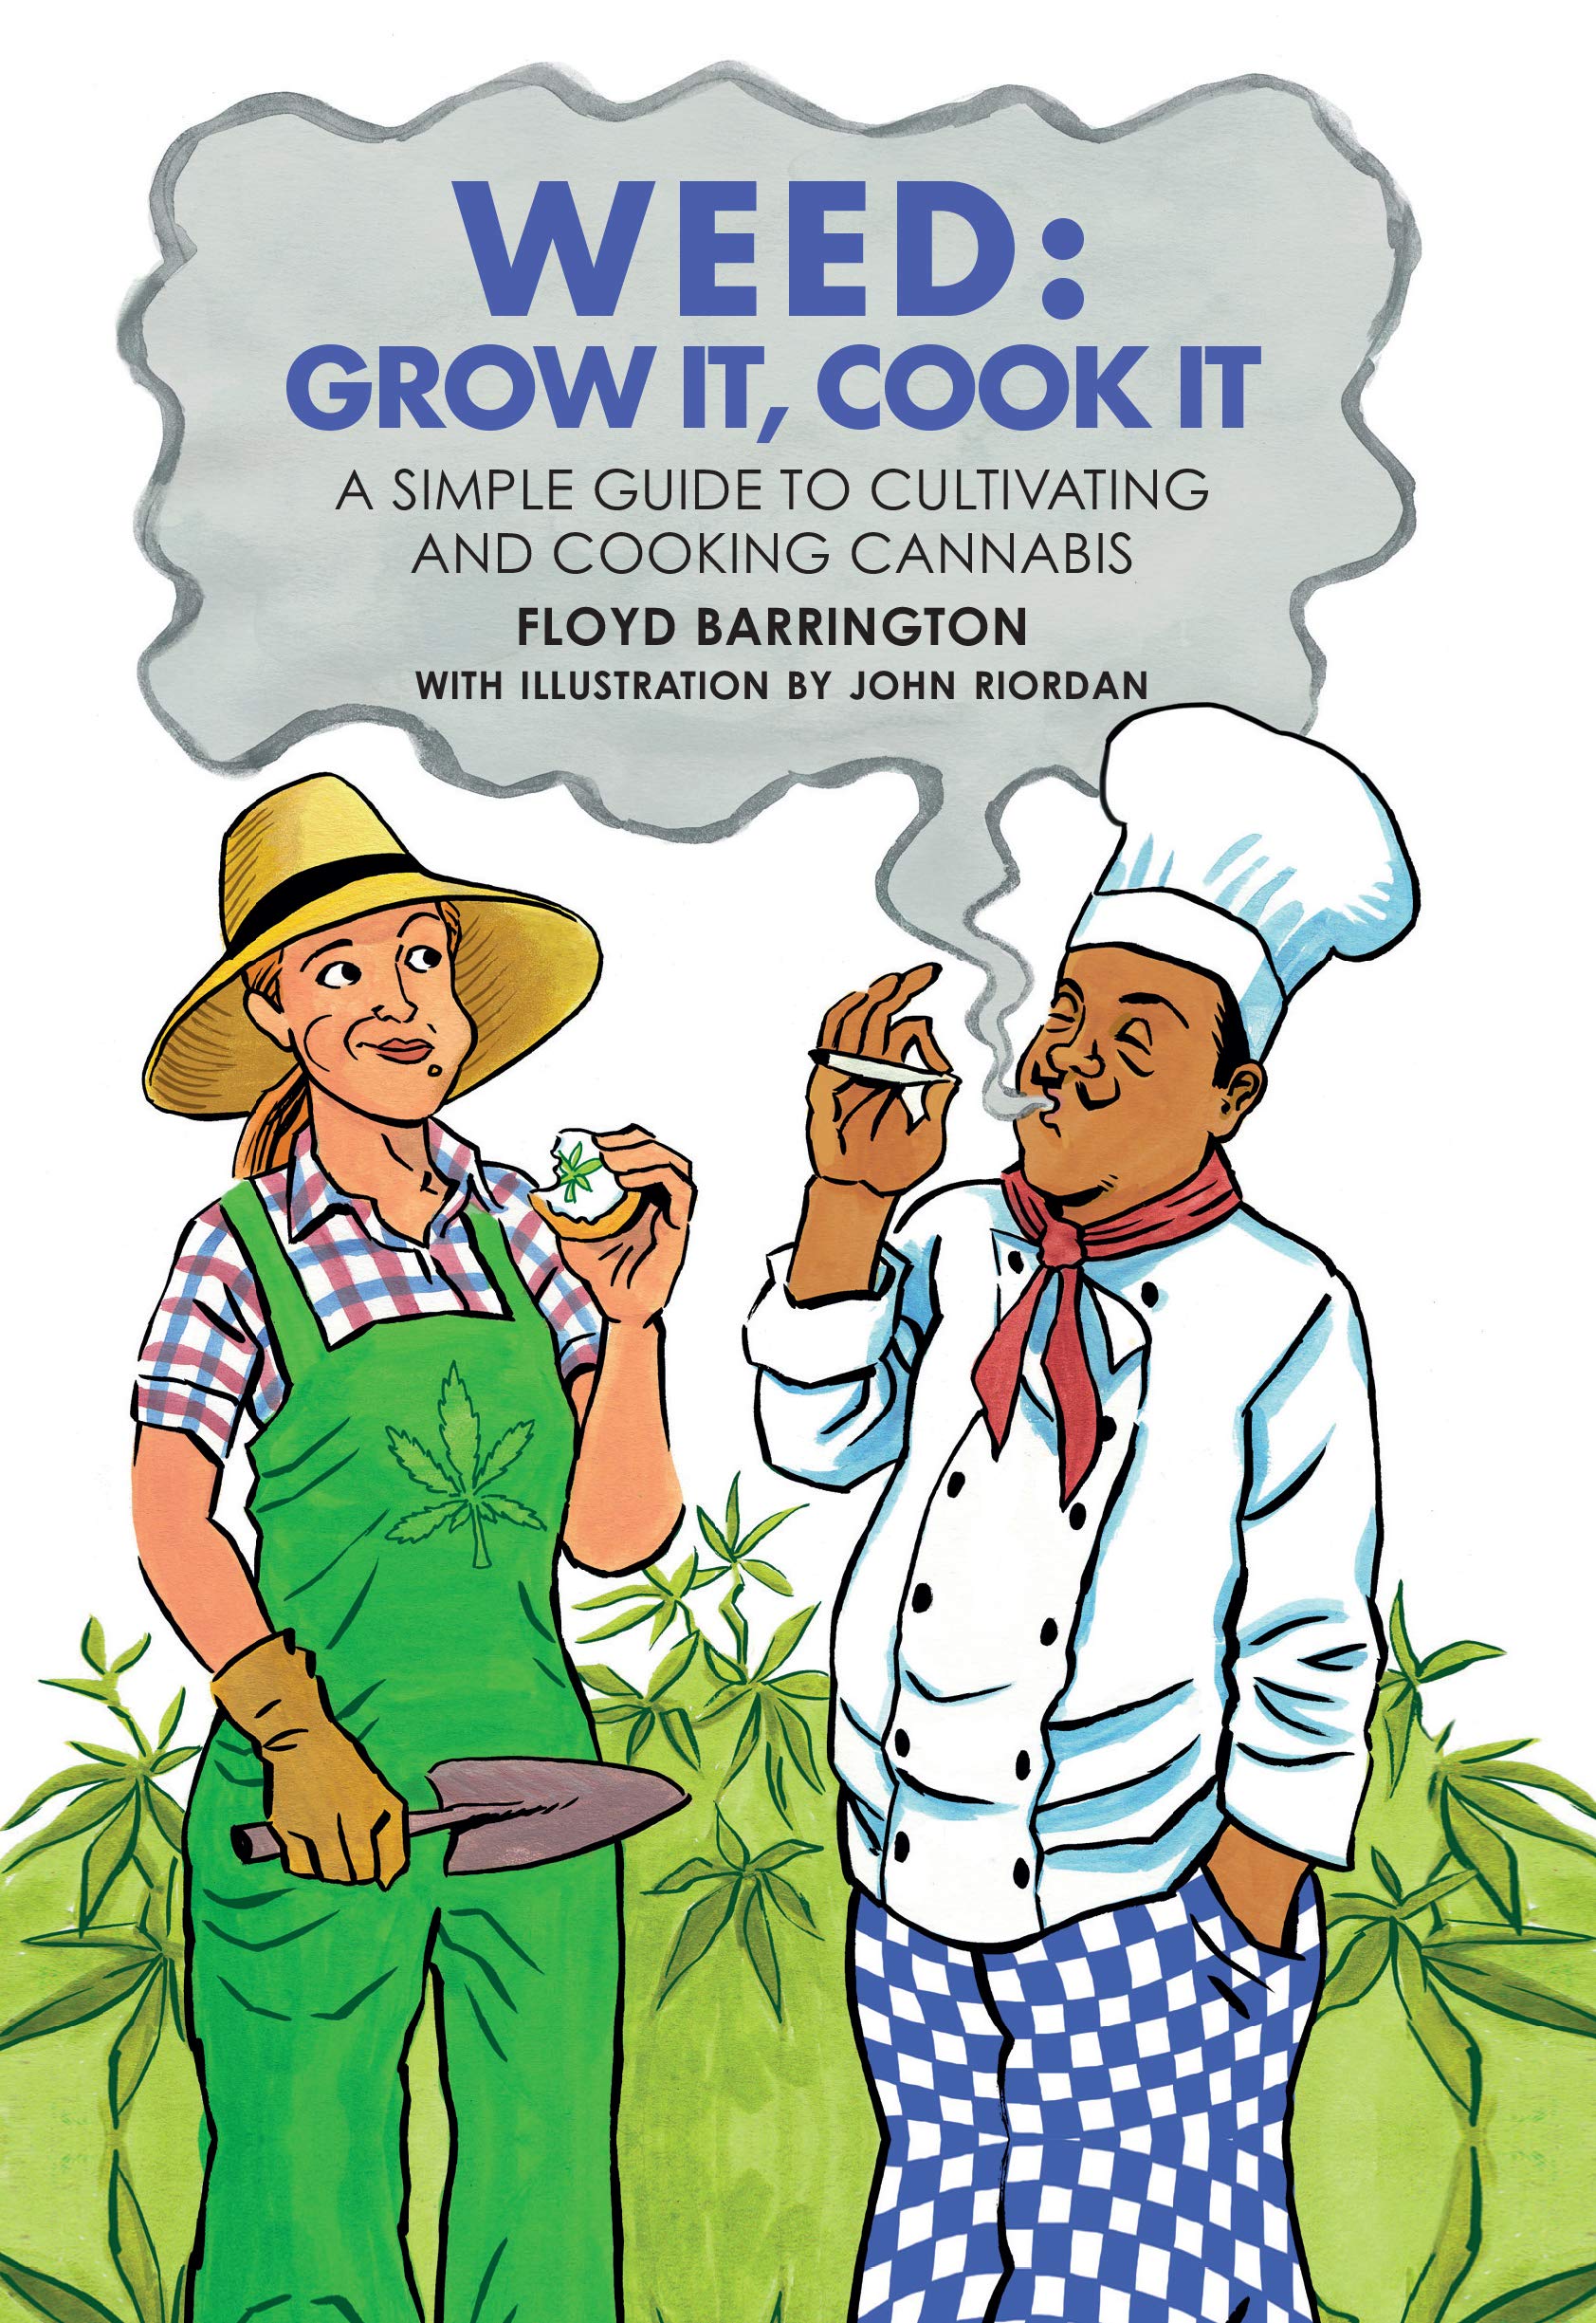 Weed: Grow It, Cook It: A Simple Guide to Cultivating and Cooking Cannabis (Floyd Barrington)